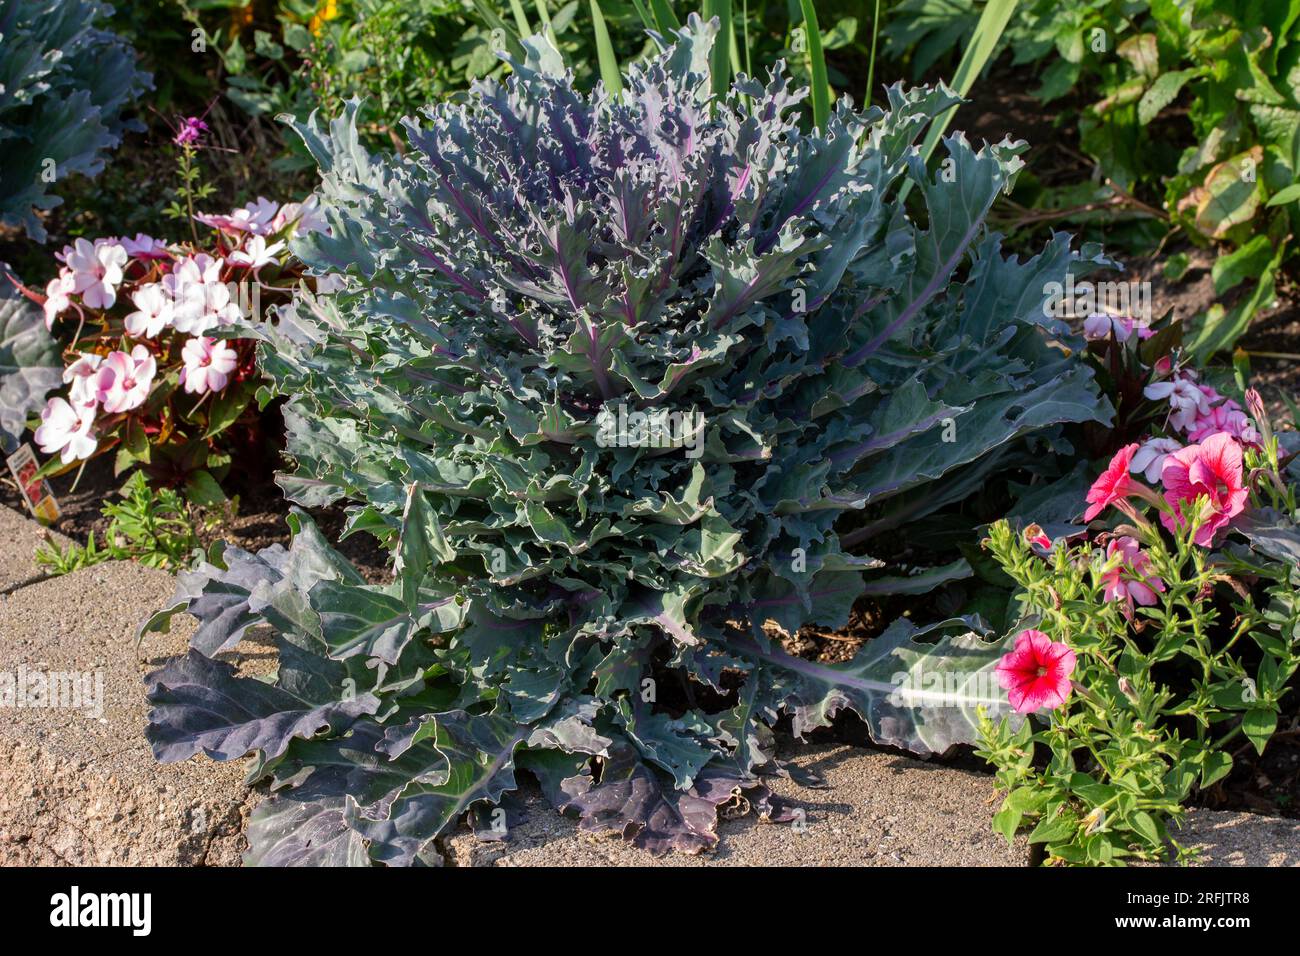 Close up view of an ornamental kale plant (brassica oleracea) with beautiful large purple textured foliage in a sunny garden Stock Photo